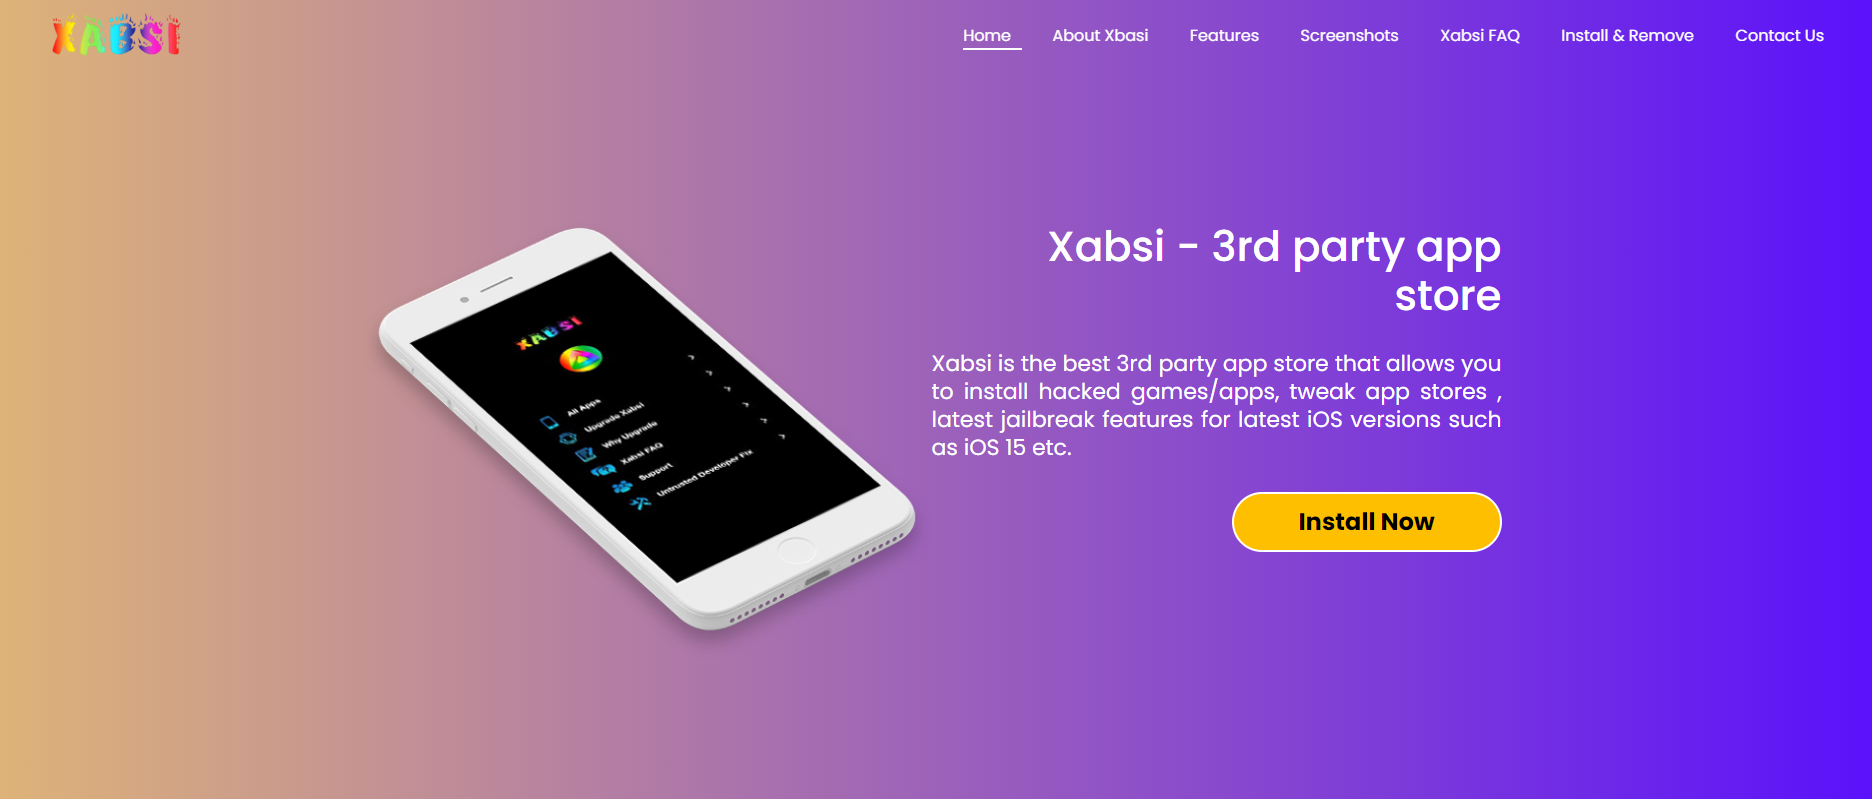 Overview Of Xabsi - Third Party App Stores For iOS